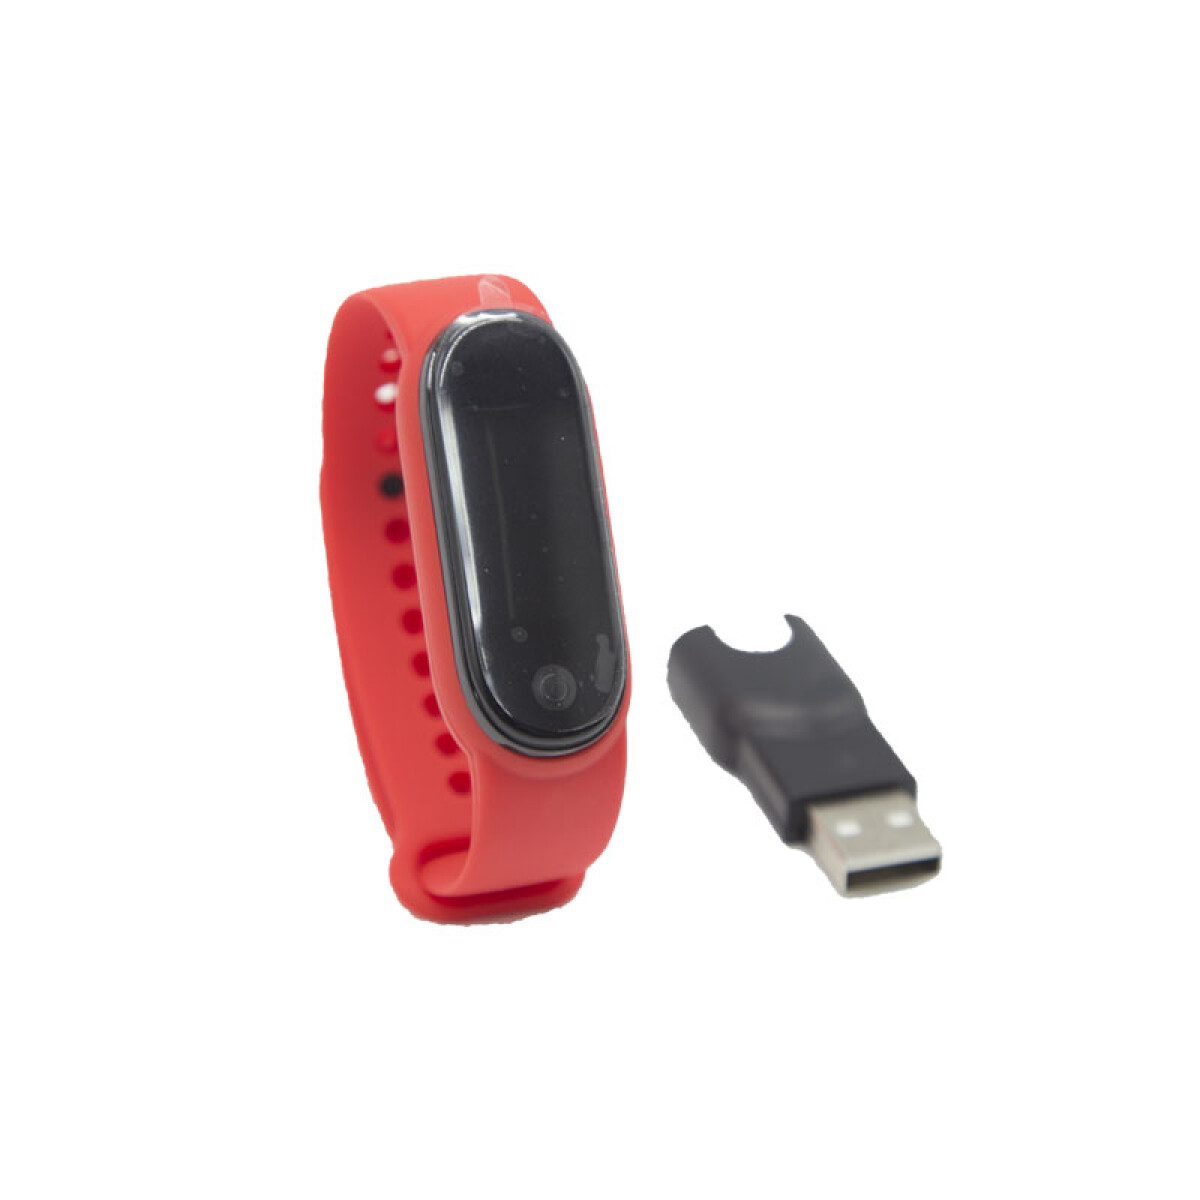 Reloj Pulsera SMARTBAND M5 , IOS y ANDROID, BLUETOOTH TOUCH (HE1341) - ROJO 